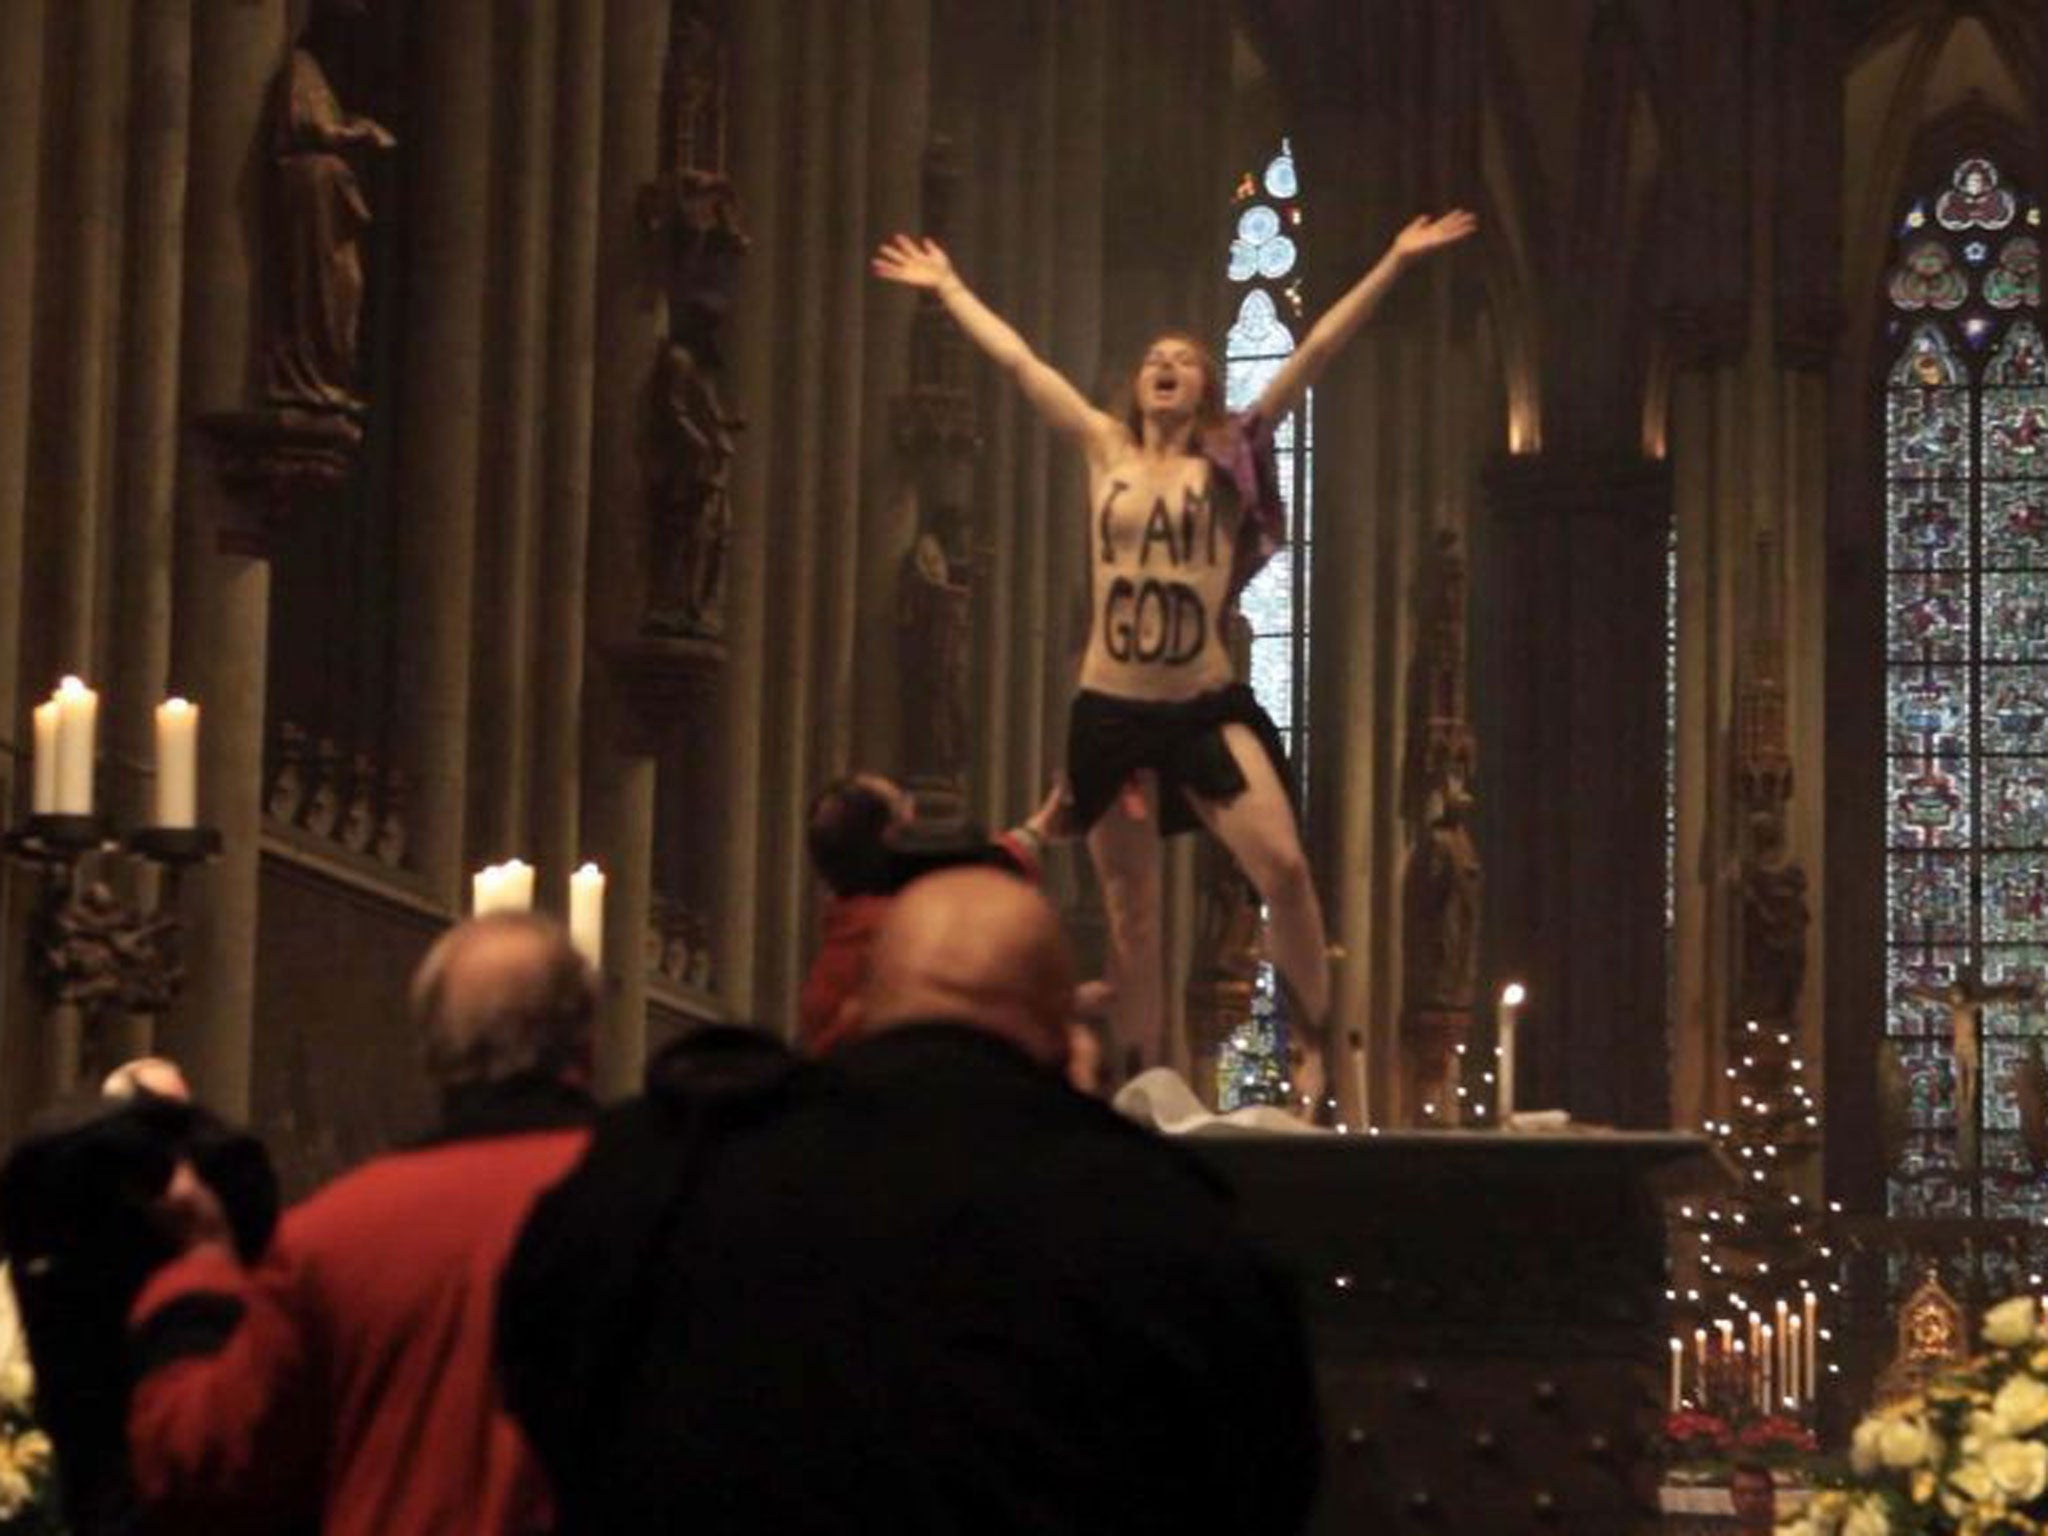 A topless Femen activist with the words 'I am God' painted on her chest stands on the altar during the Christmas Day service in Cologne Cathedral